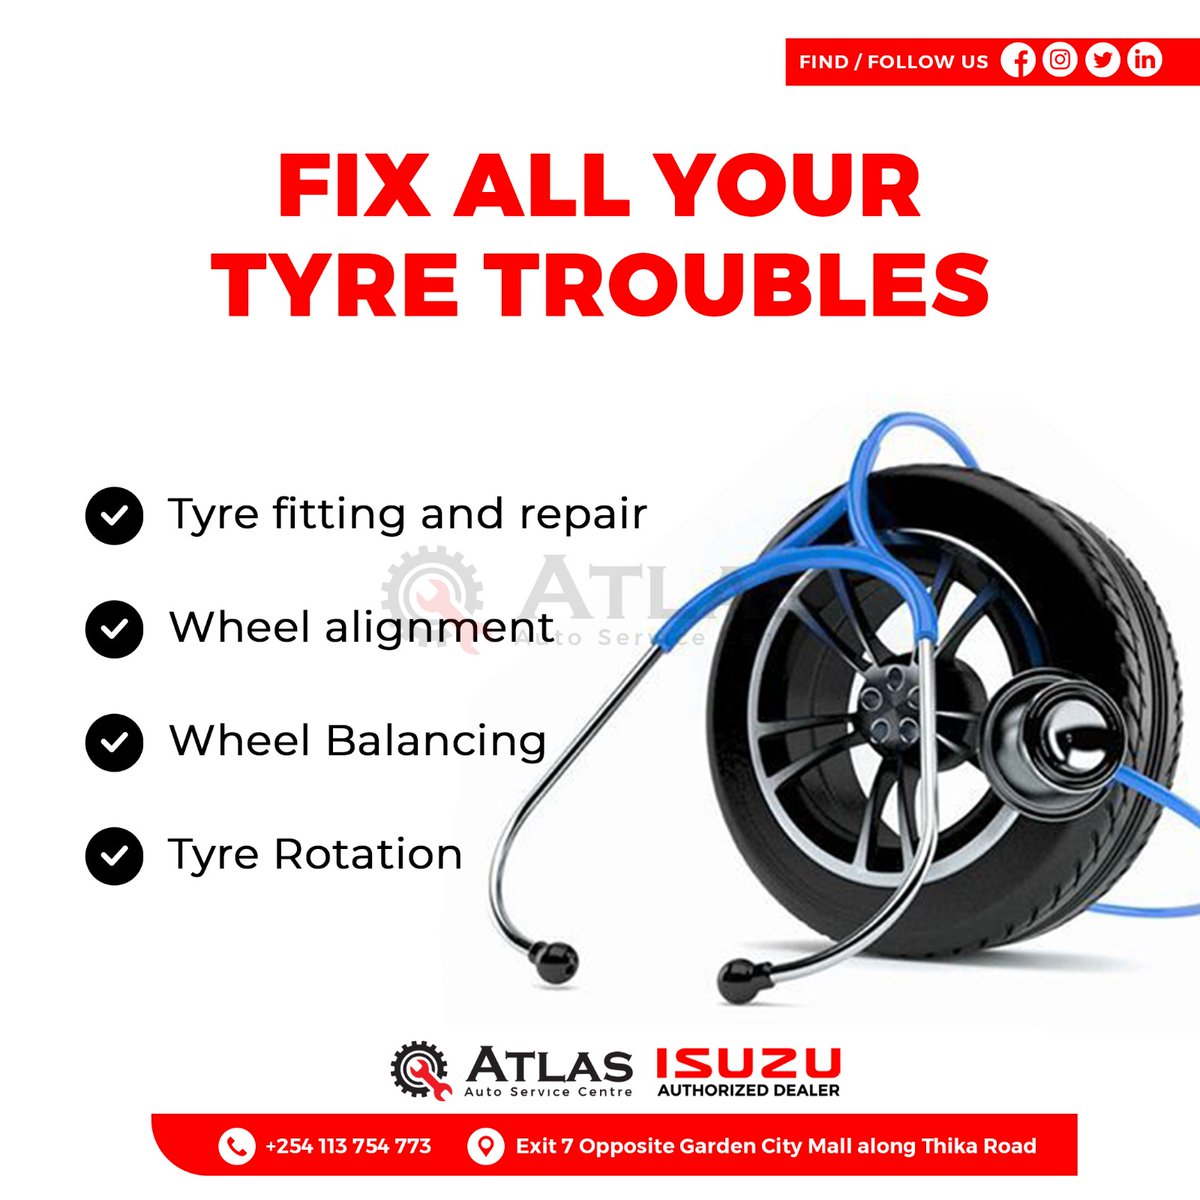 Trouble with your car?Say no more! 🛠️🚗 Let @Atlasautocentre be your go-to solution for all things automotive.From minor fixes to major overhauls,our expert team has got you covered.Get ready to hit the road worry-free! 💪 #howcanwehelp #AtlasAutoService #ProblemSolved #sigor